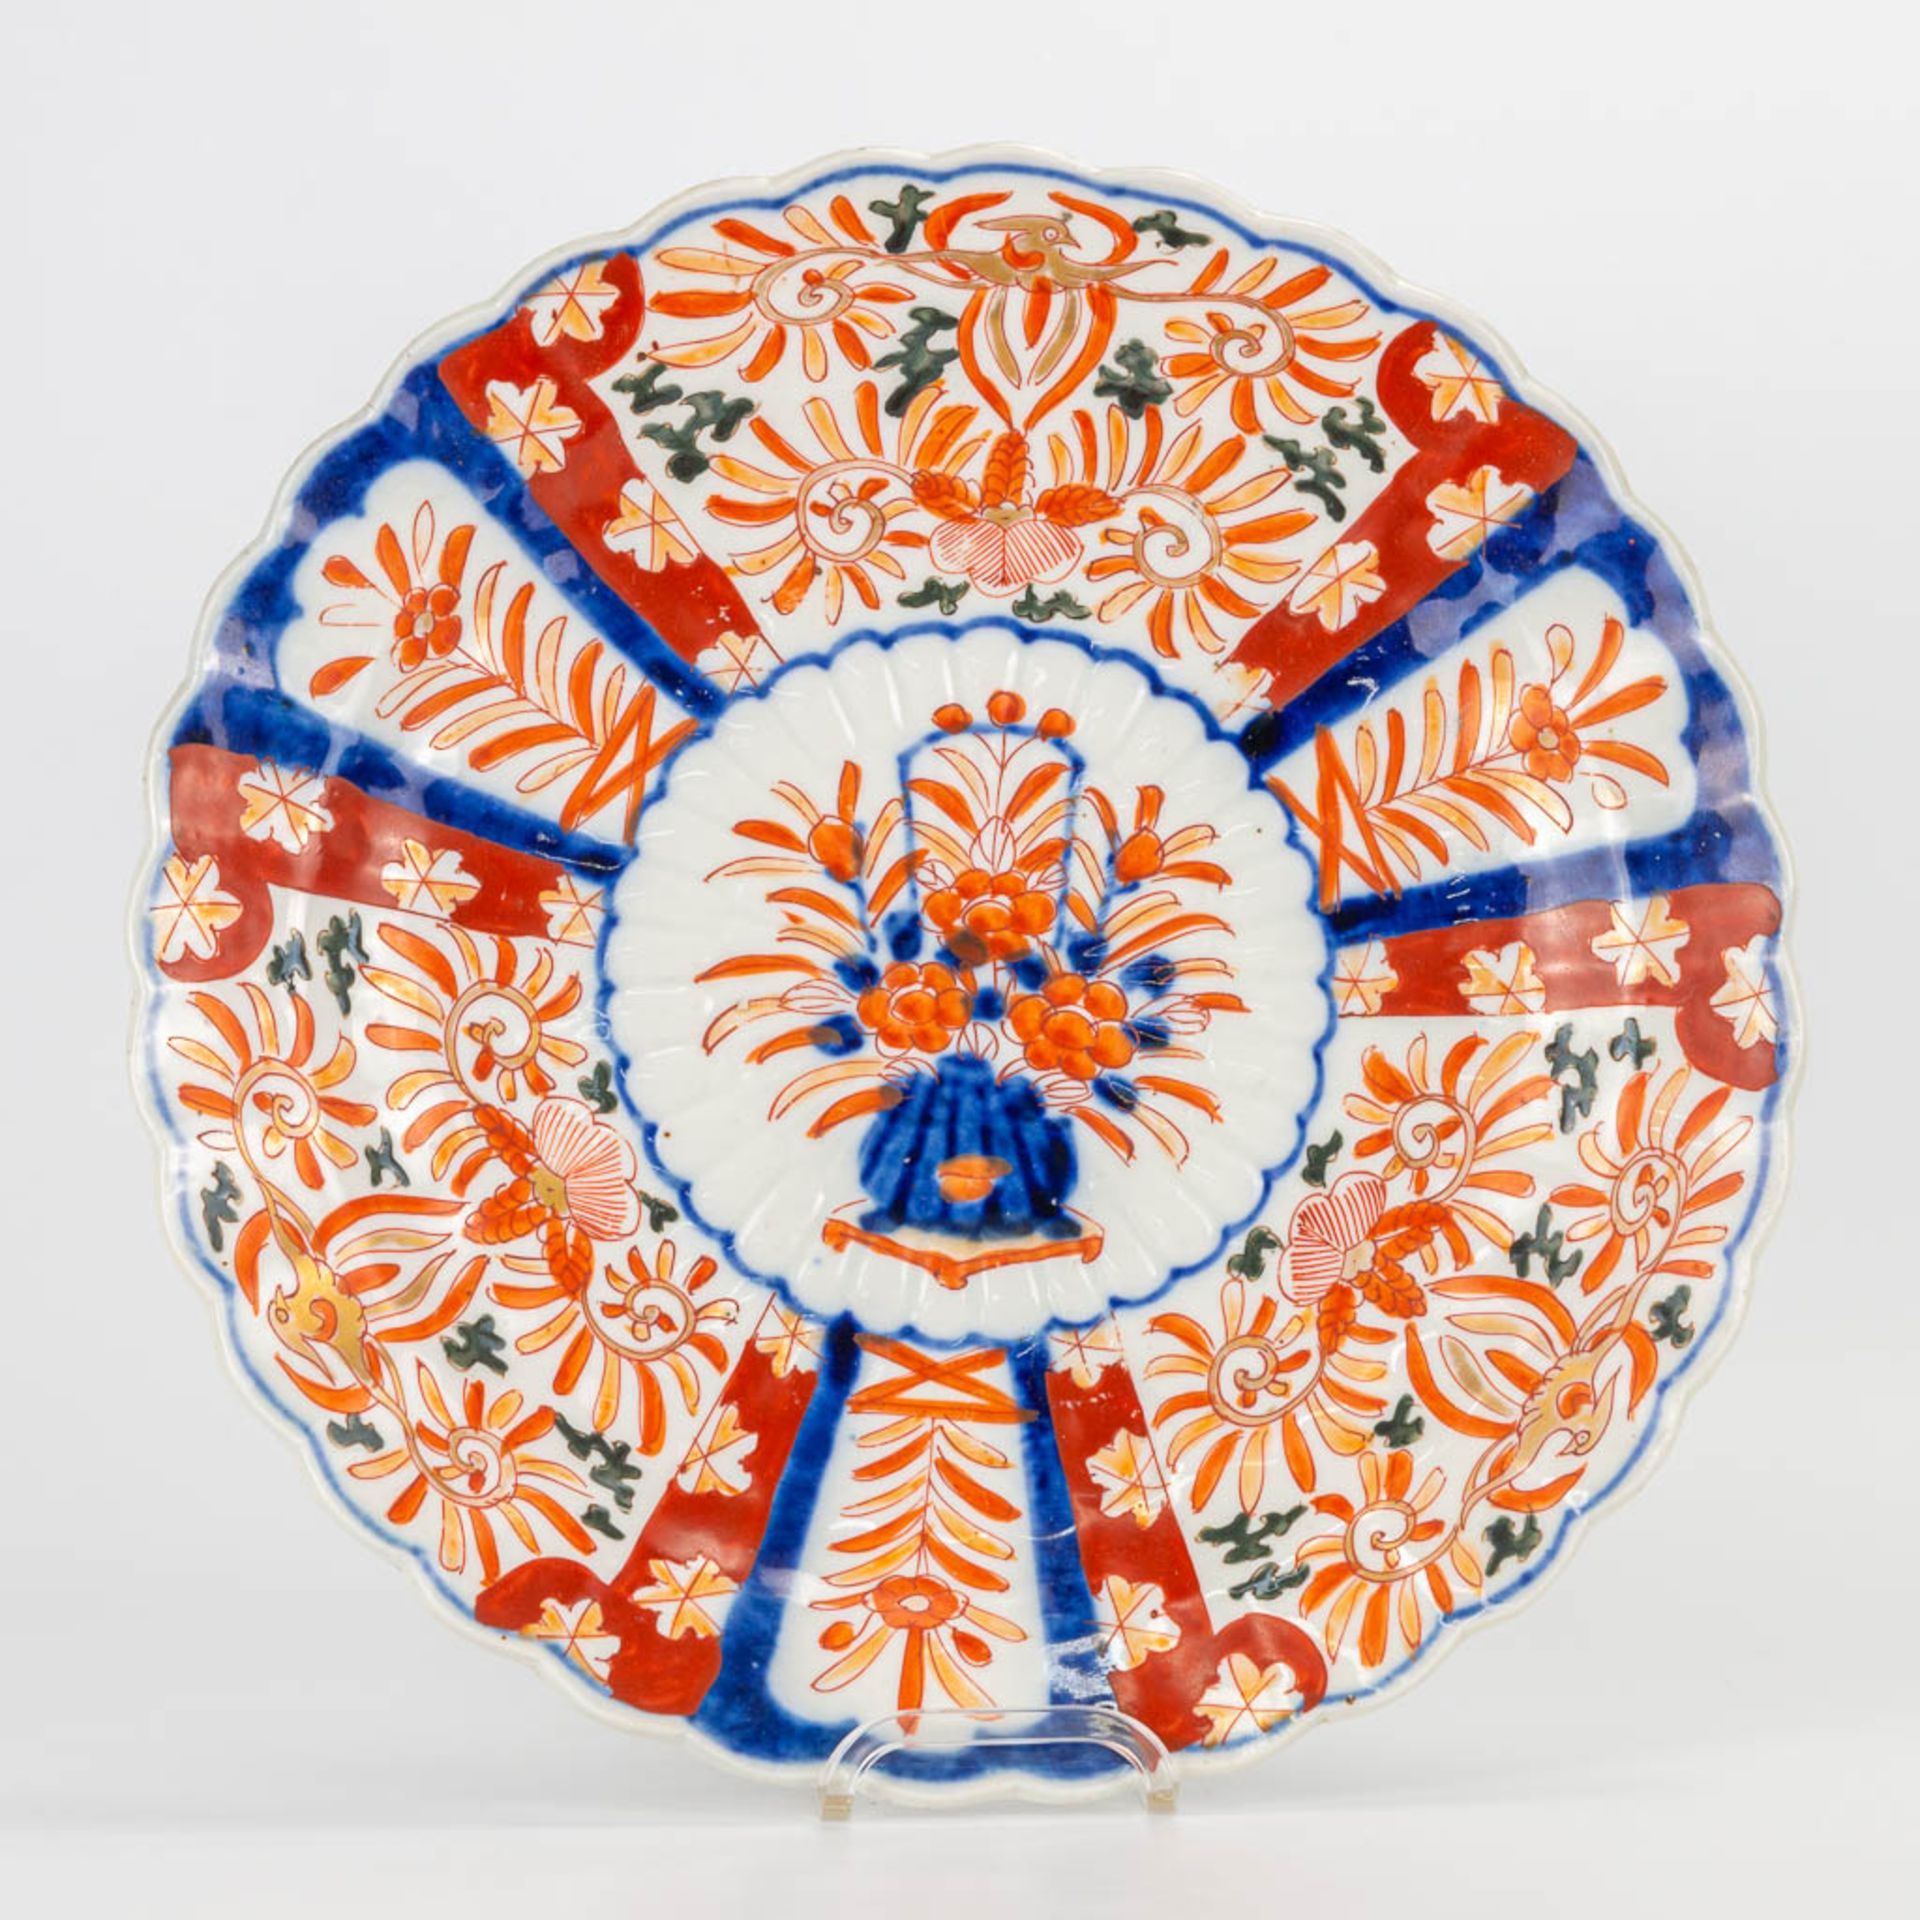 A collection of 5 Imari display plates made of Japanese porcelain. (4,5 x 30 cm) - Image 14 of 16